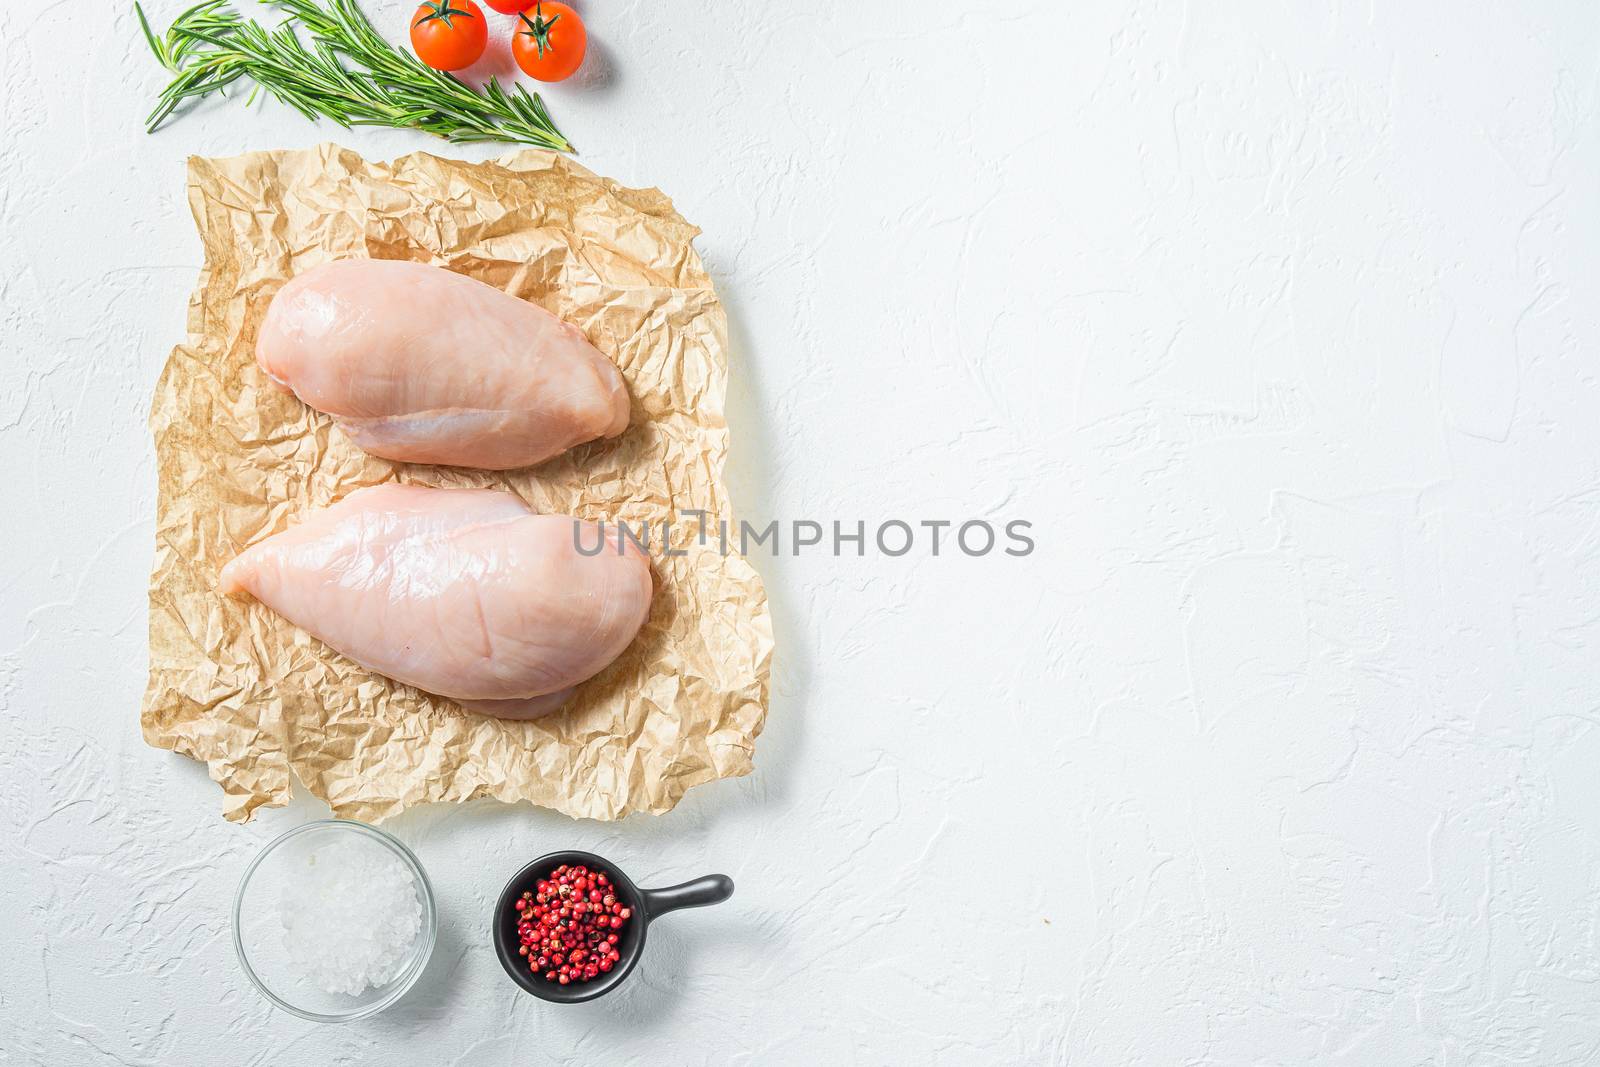 Raw meat, ready for grill or barbeque chicken breast filet, with herbs and spices on craft paper over white background, top view space for text. by Ilianesolenyi